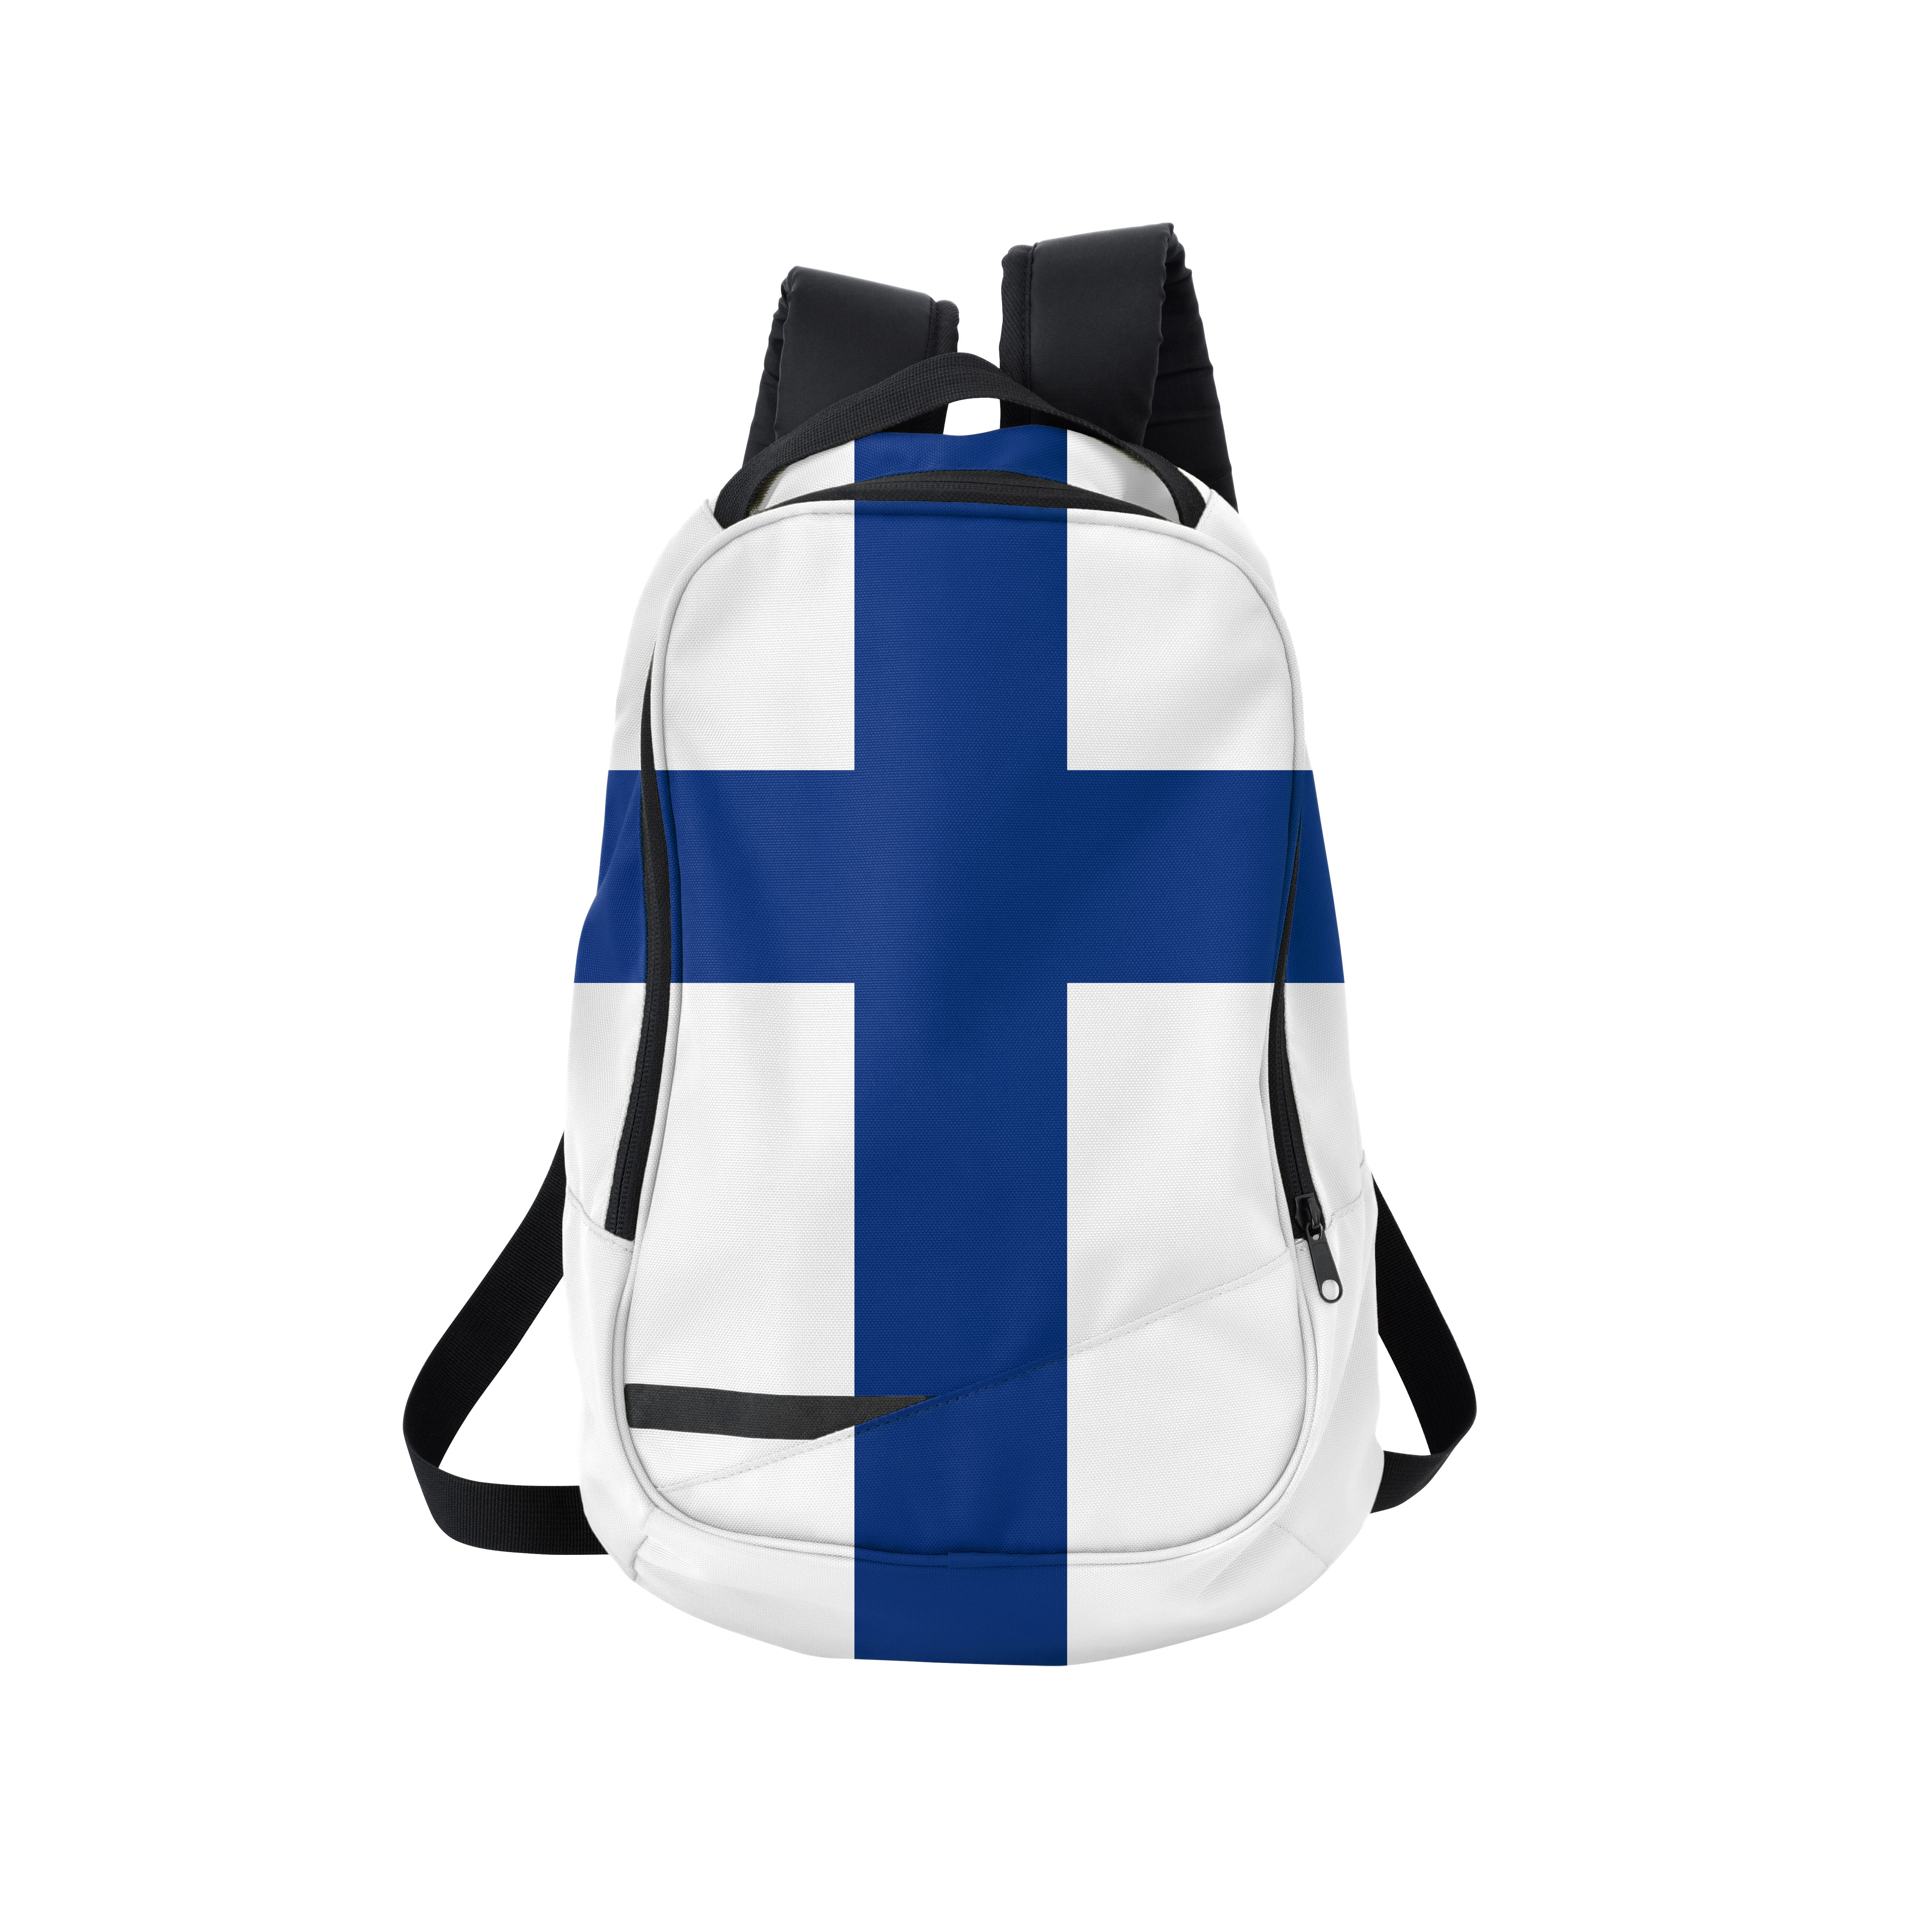 Finnish flag backpack isolated on white w/ path